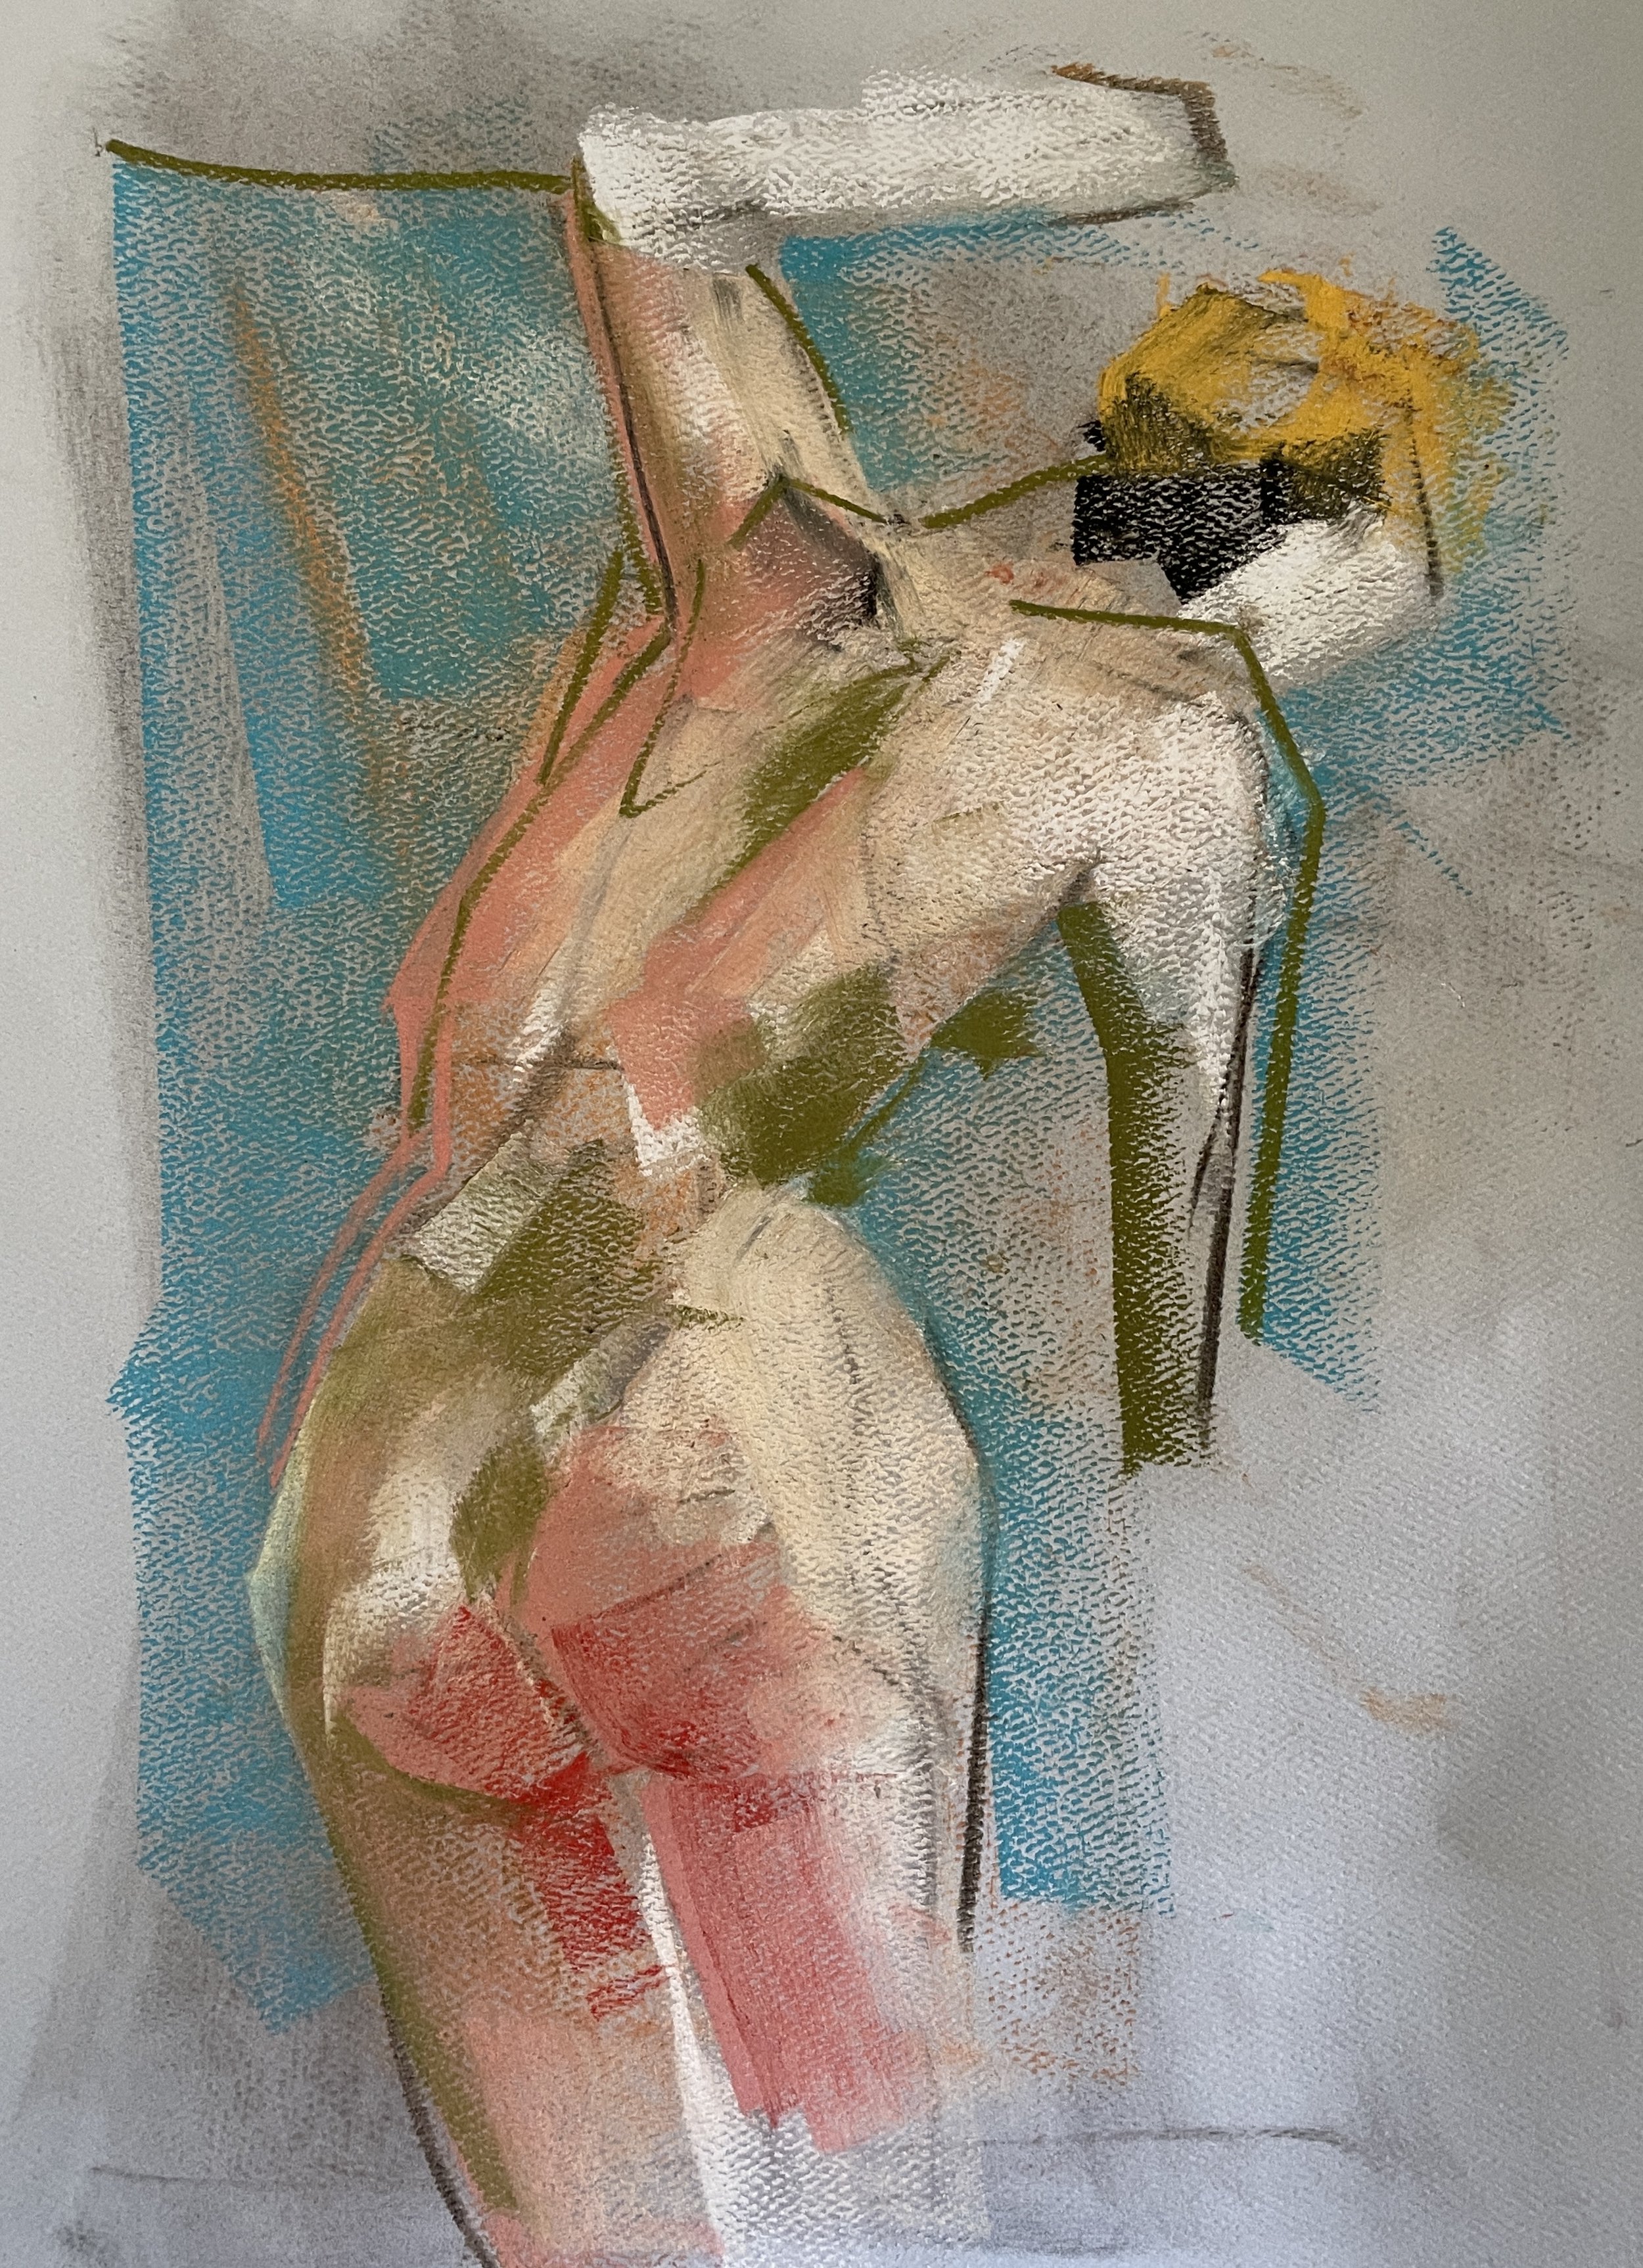 E.C. Back Pose, Pastel, 12 by 15 inches, 2022.